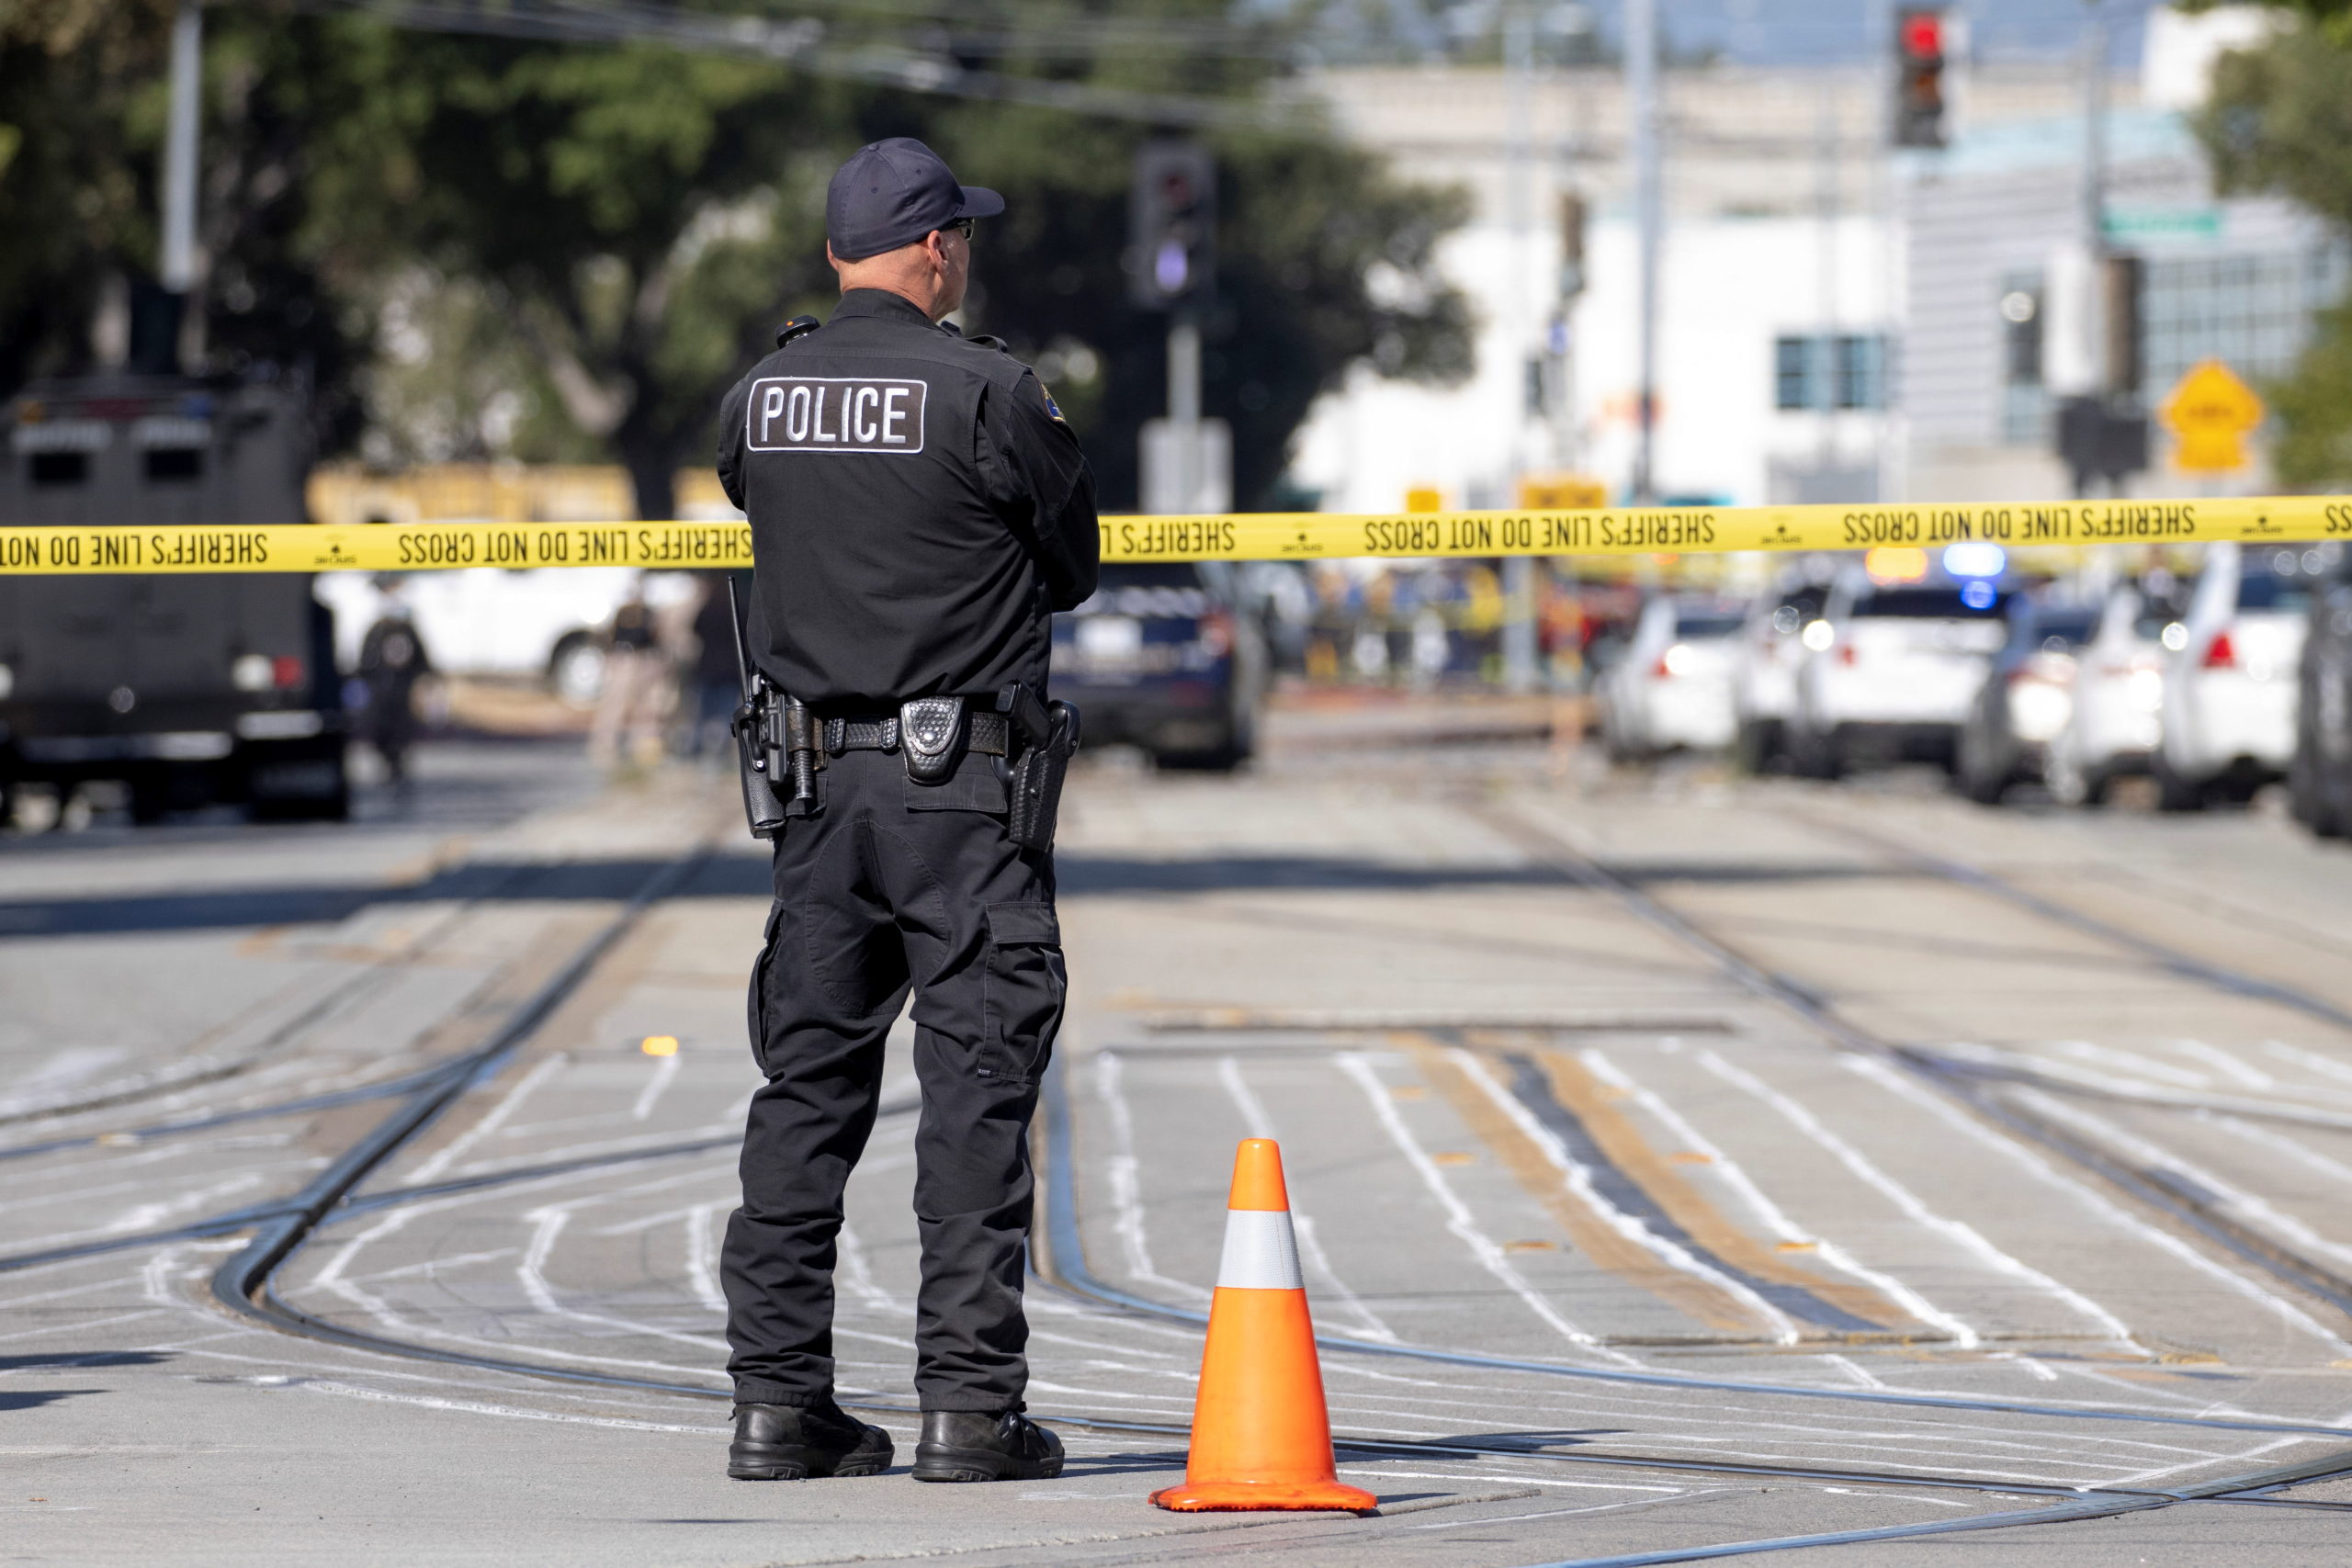 Police secure the scene of a mass shooting at a rail yard run by the Santa Clara Valley Transportation Authority in San Jose, California, U.S. May 26, 2021. REUTERS/Peter DaSilva